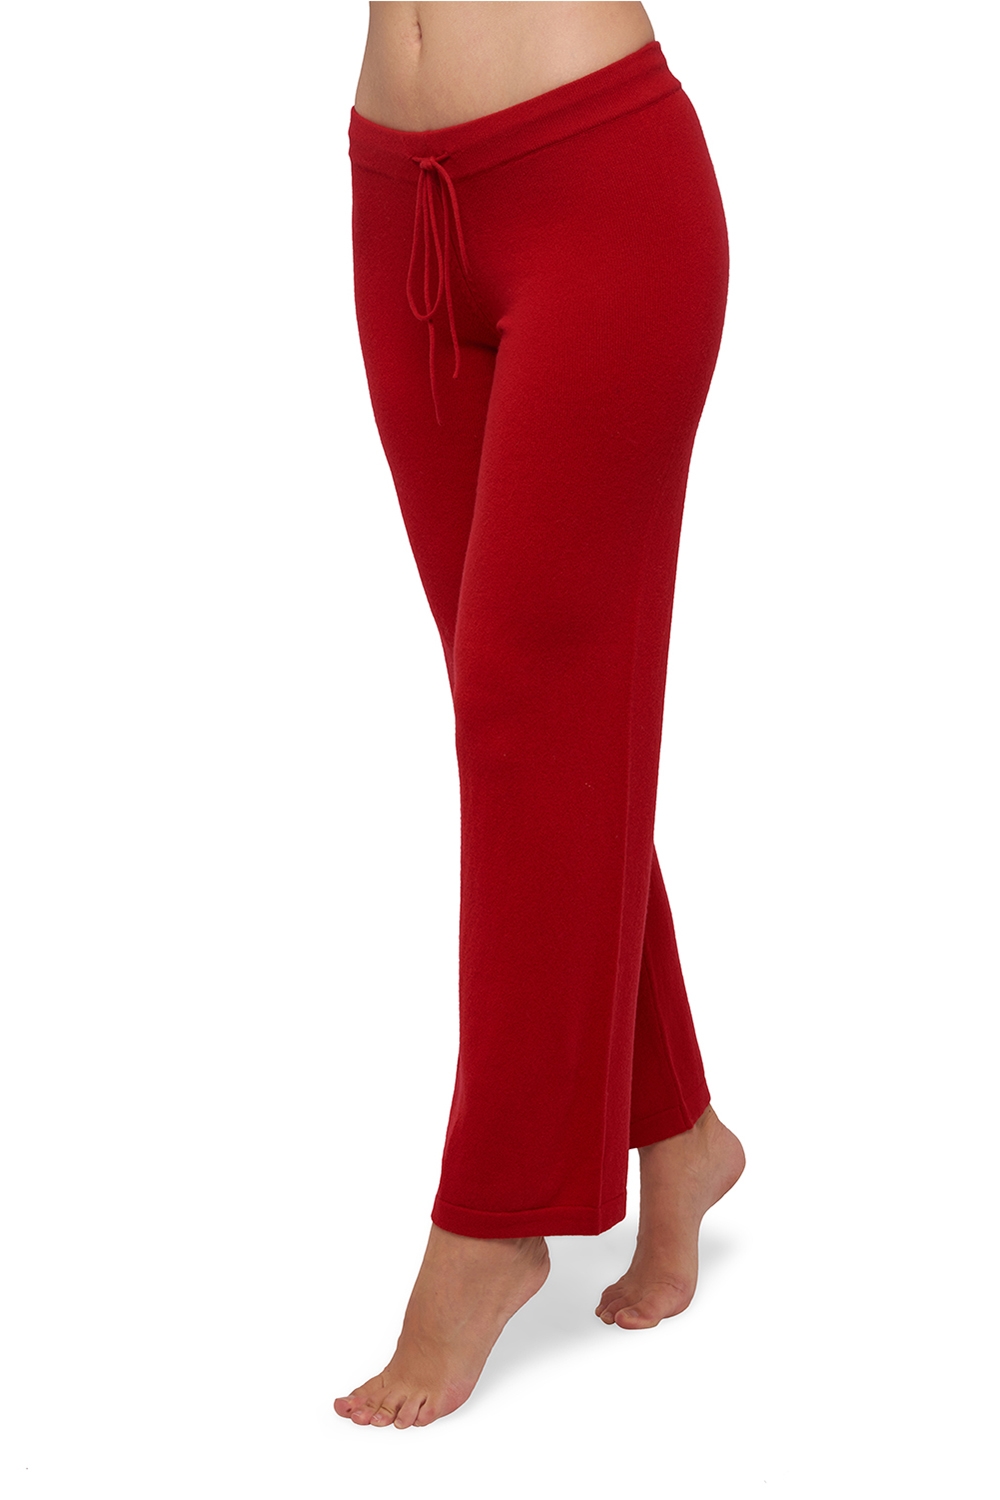 Cashmere ladies cocooning malice blood red xl